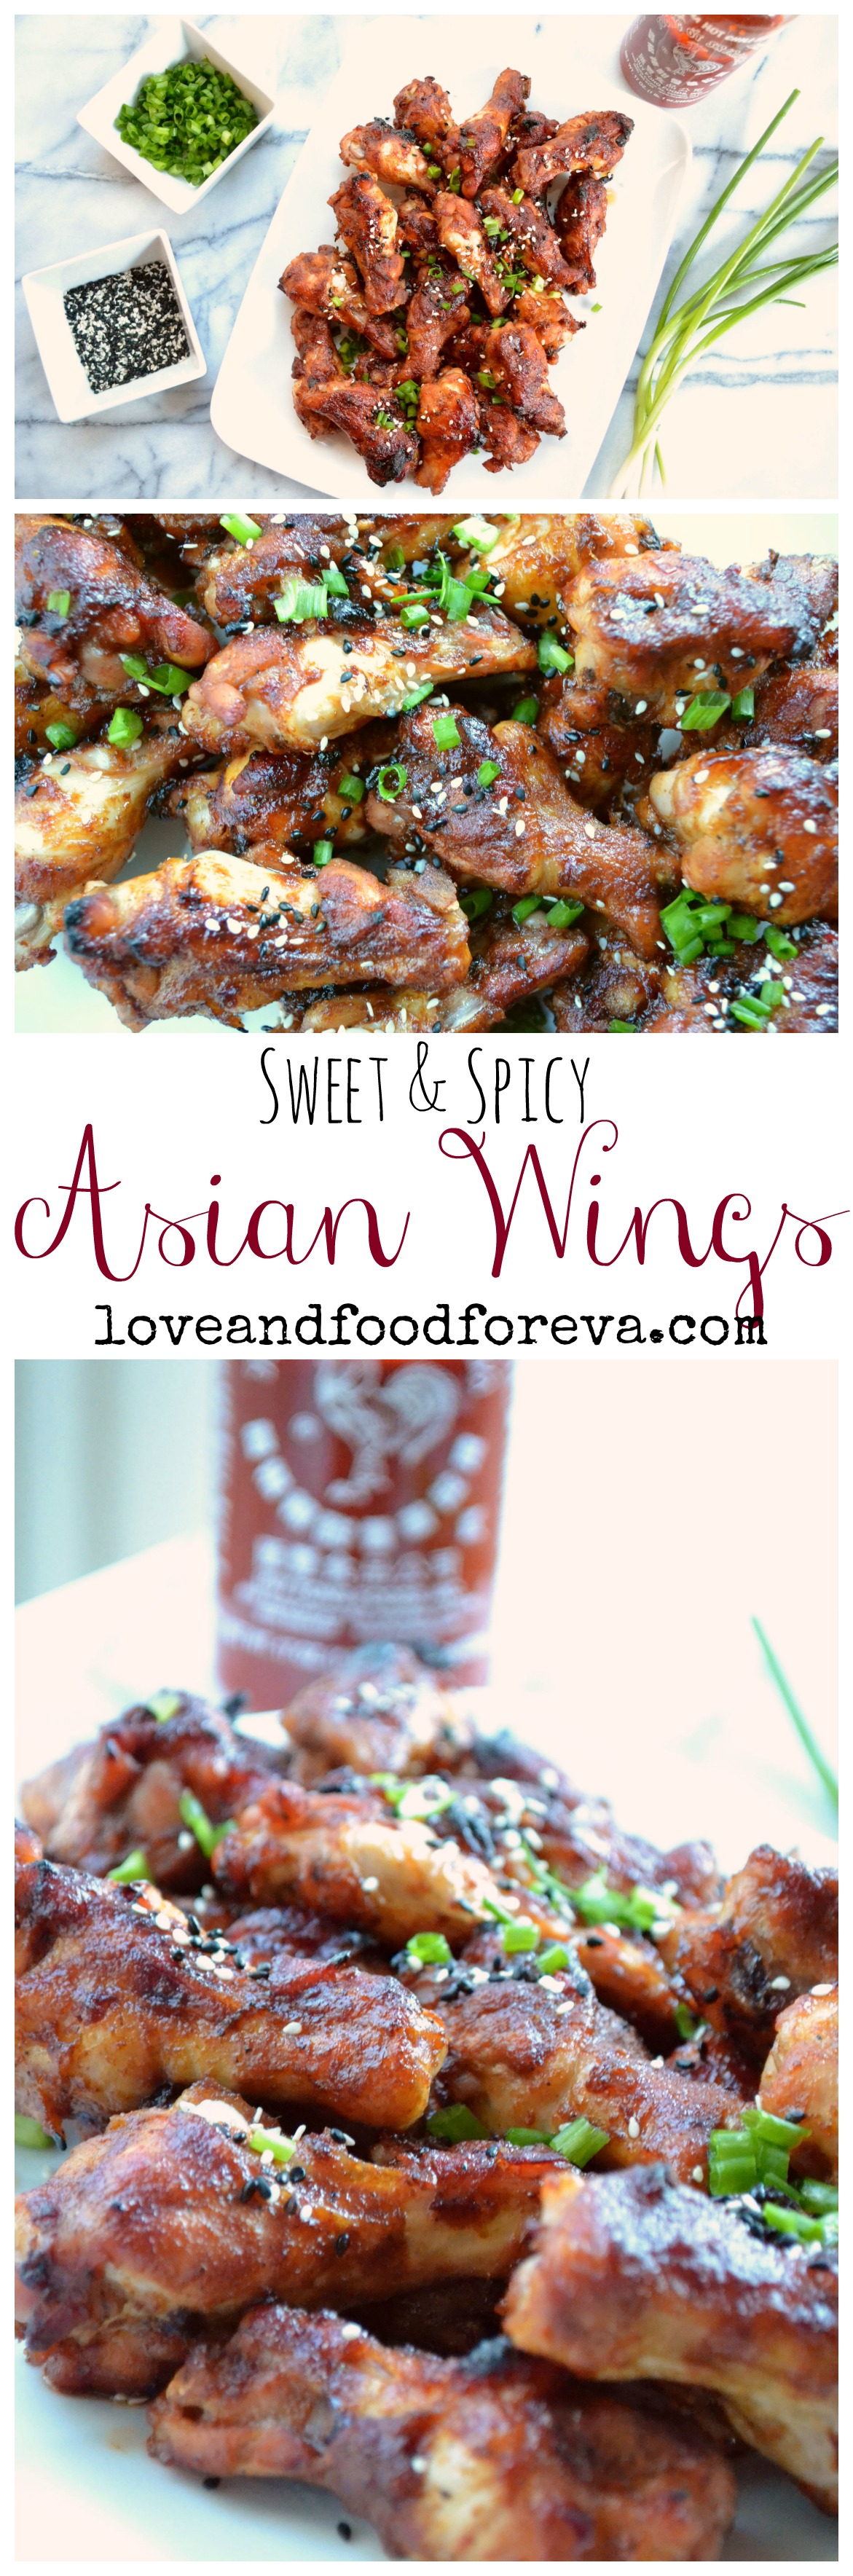 Sweet & spicy Asian Wings - perfect for game day!